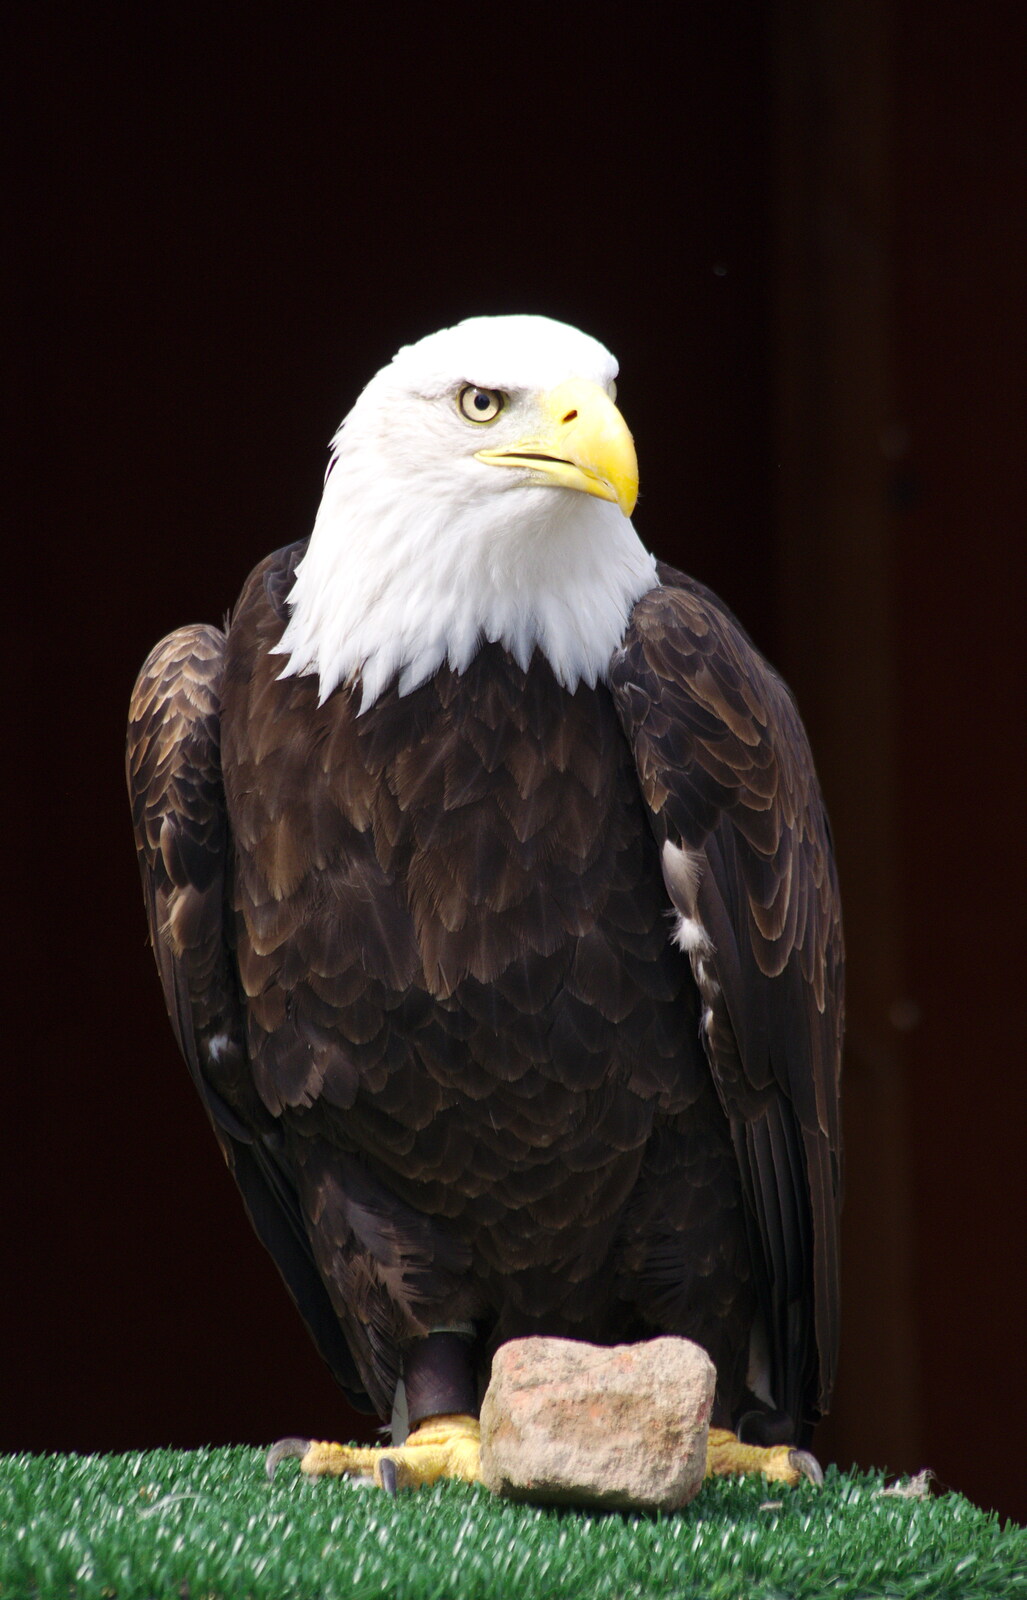 Sam the Bald Eagle from A Birthday Trip to the Zoo, Banham, Norfolk - 26th May 2014